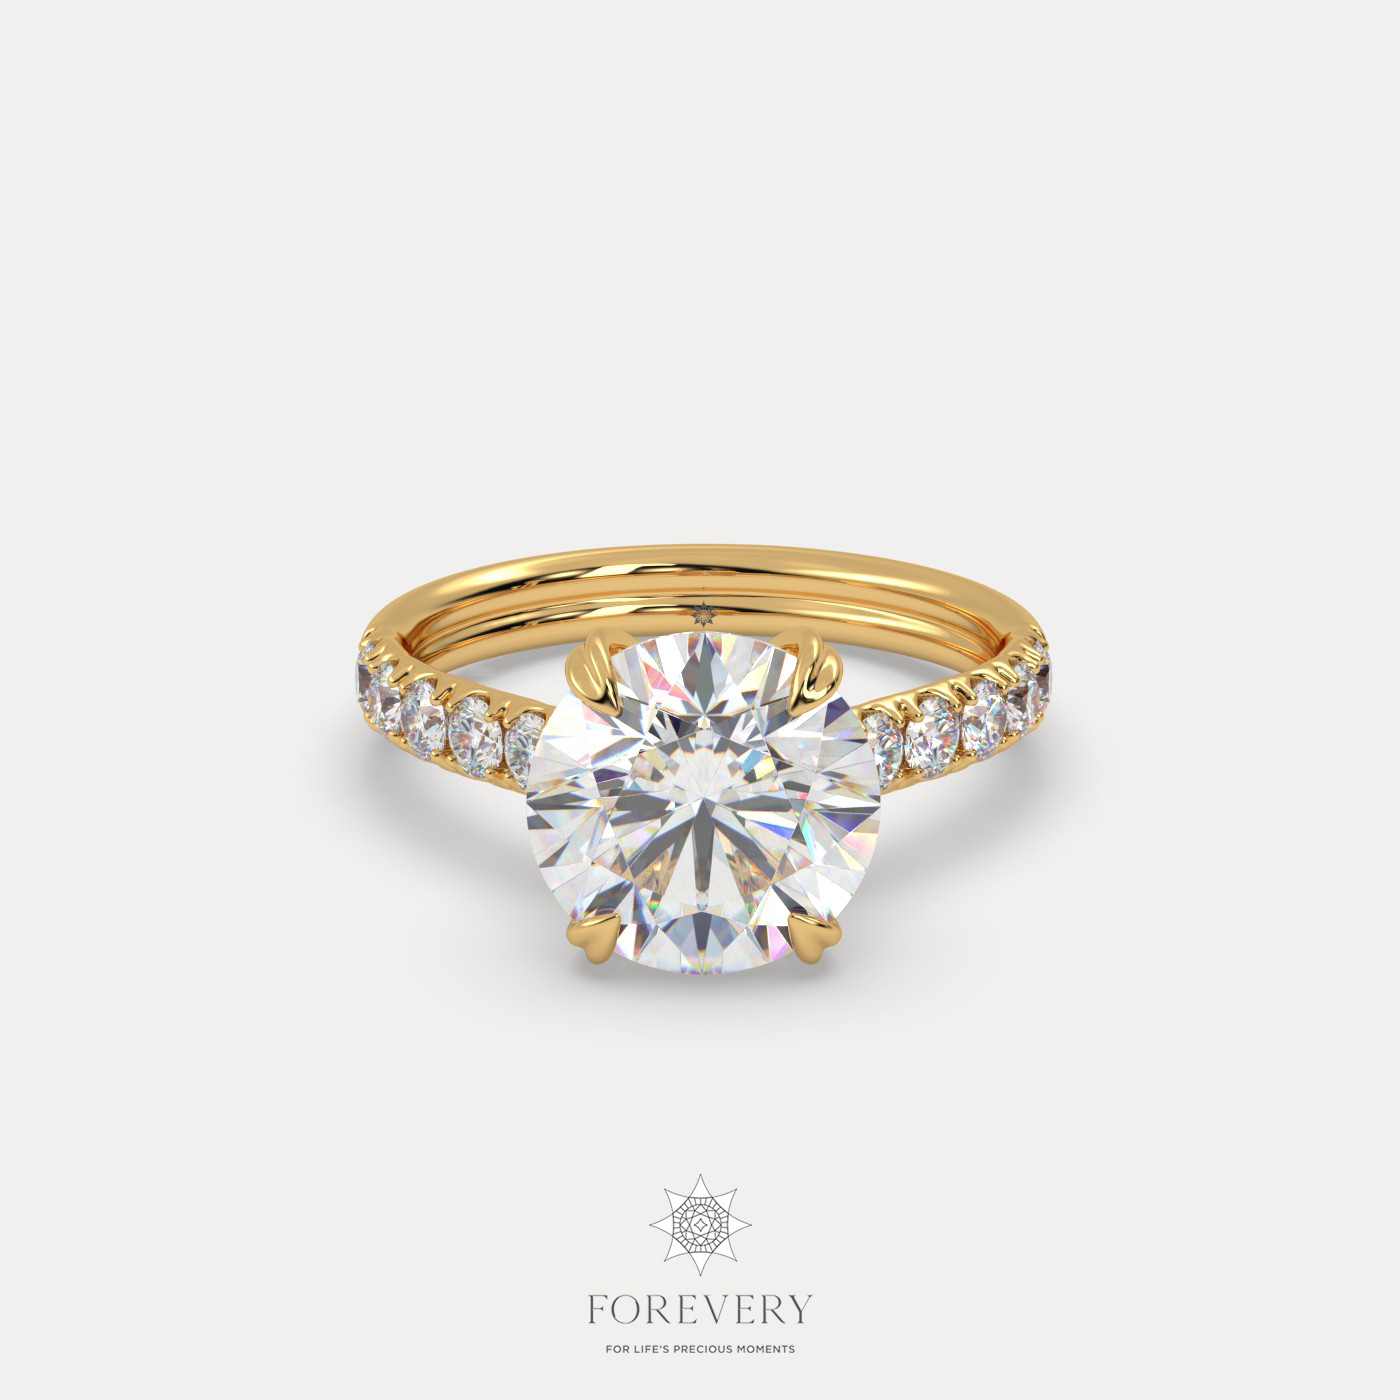 18K YELLOW GOLD Round Cut Pave-Style Diamond Engagament Ring